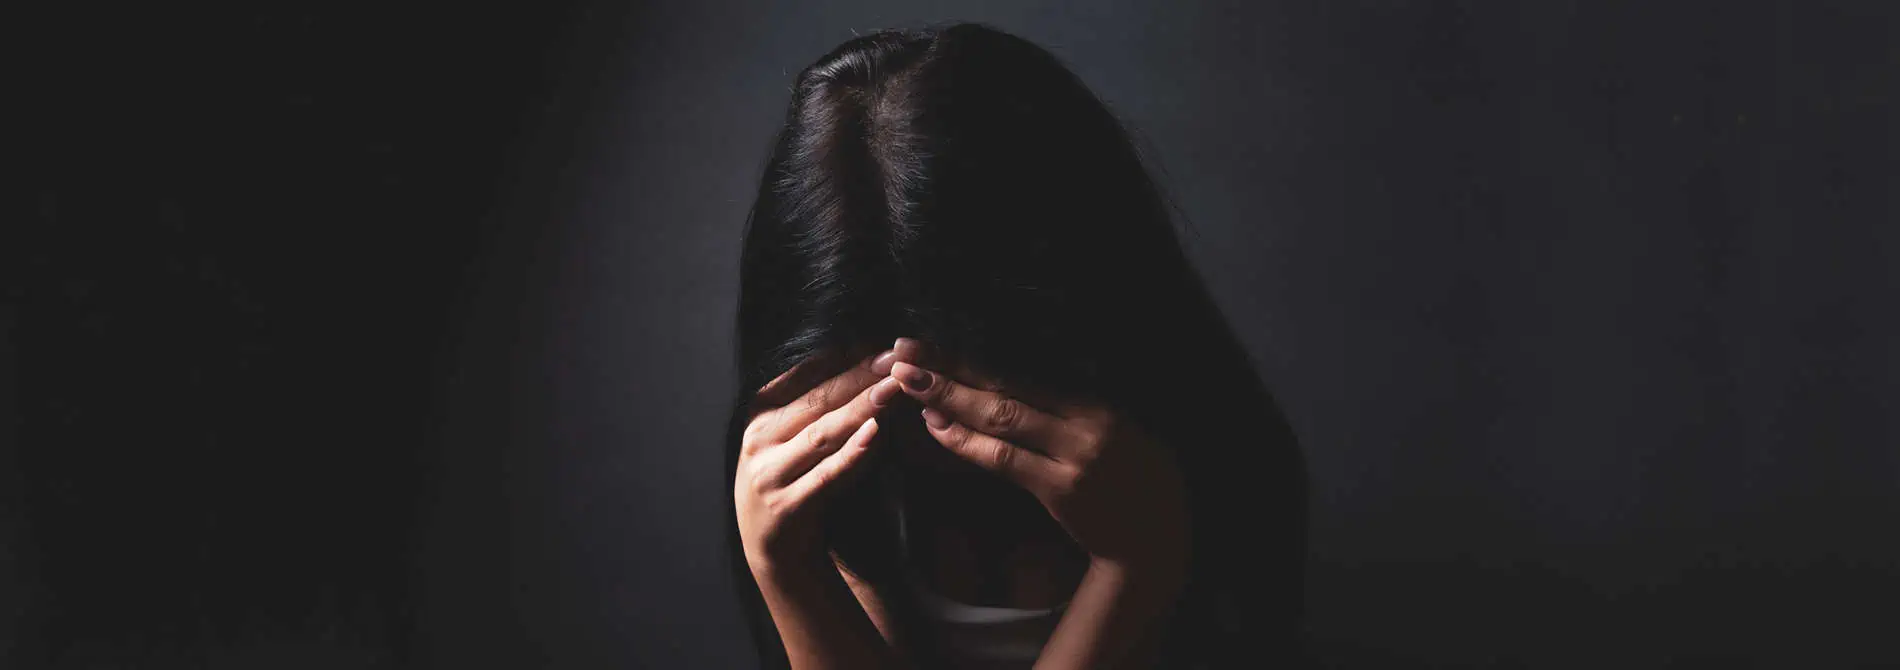 woman sad looking down holding her head with her hands